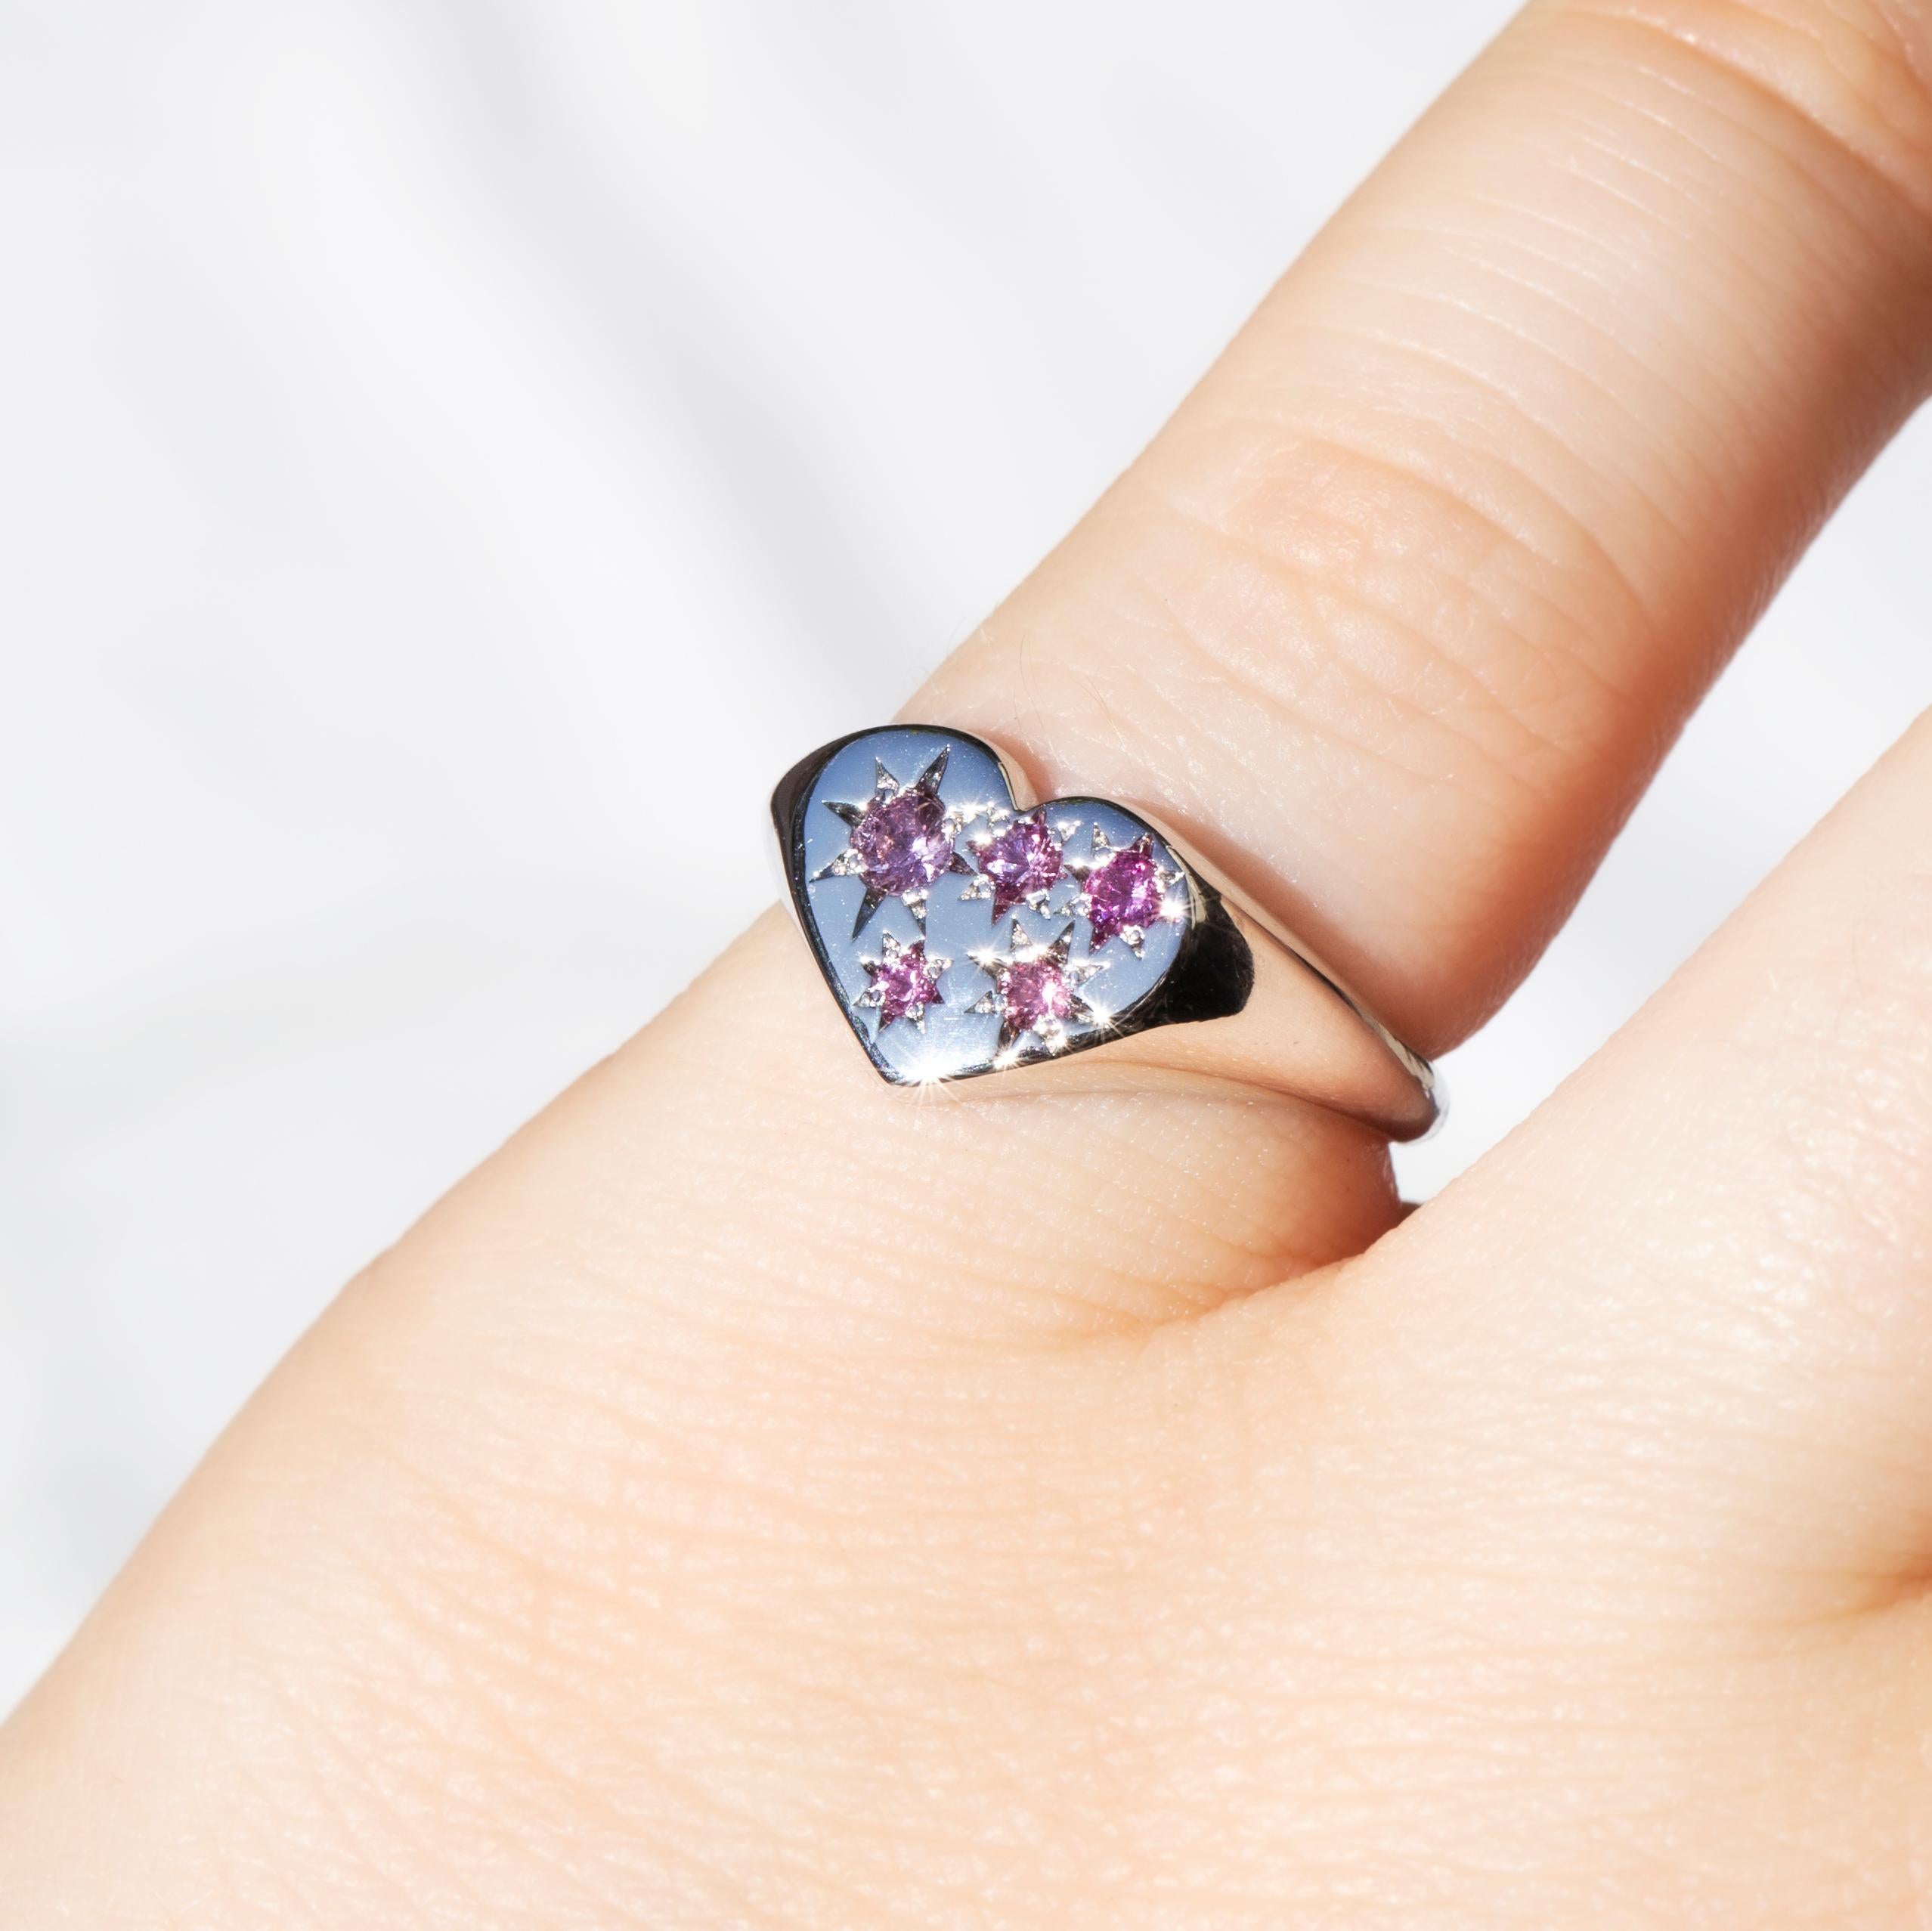 Crafted in 9 carat white gold, this adorable reinvented vintage ring sees a shimmering band widen to a heart-shaped top set with faceted round sapphires in shades of pinks and purples. Her name is Indira, an affectionate symbol of the sanctity of